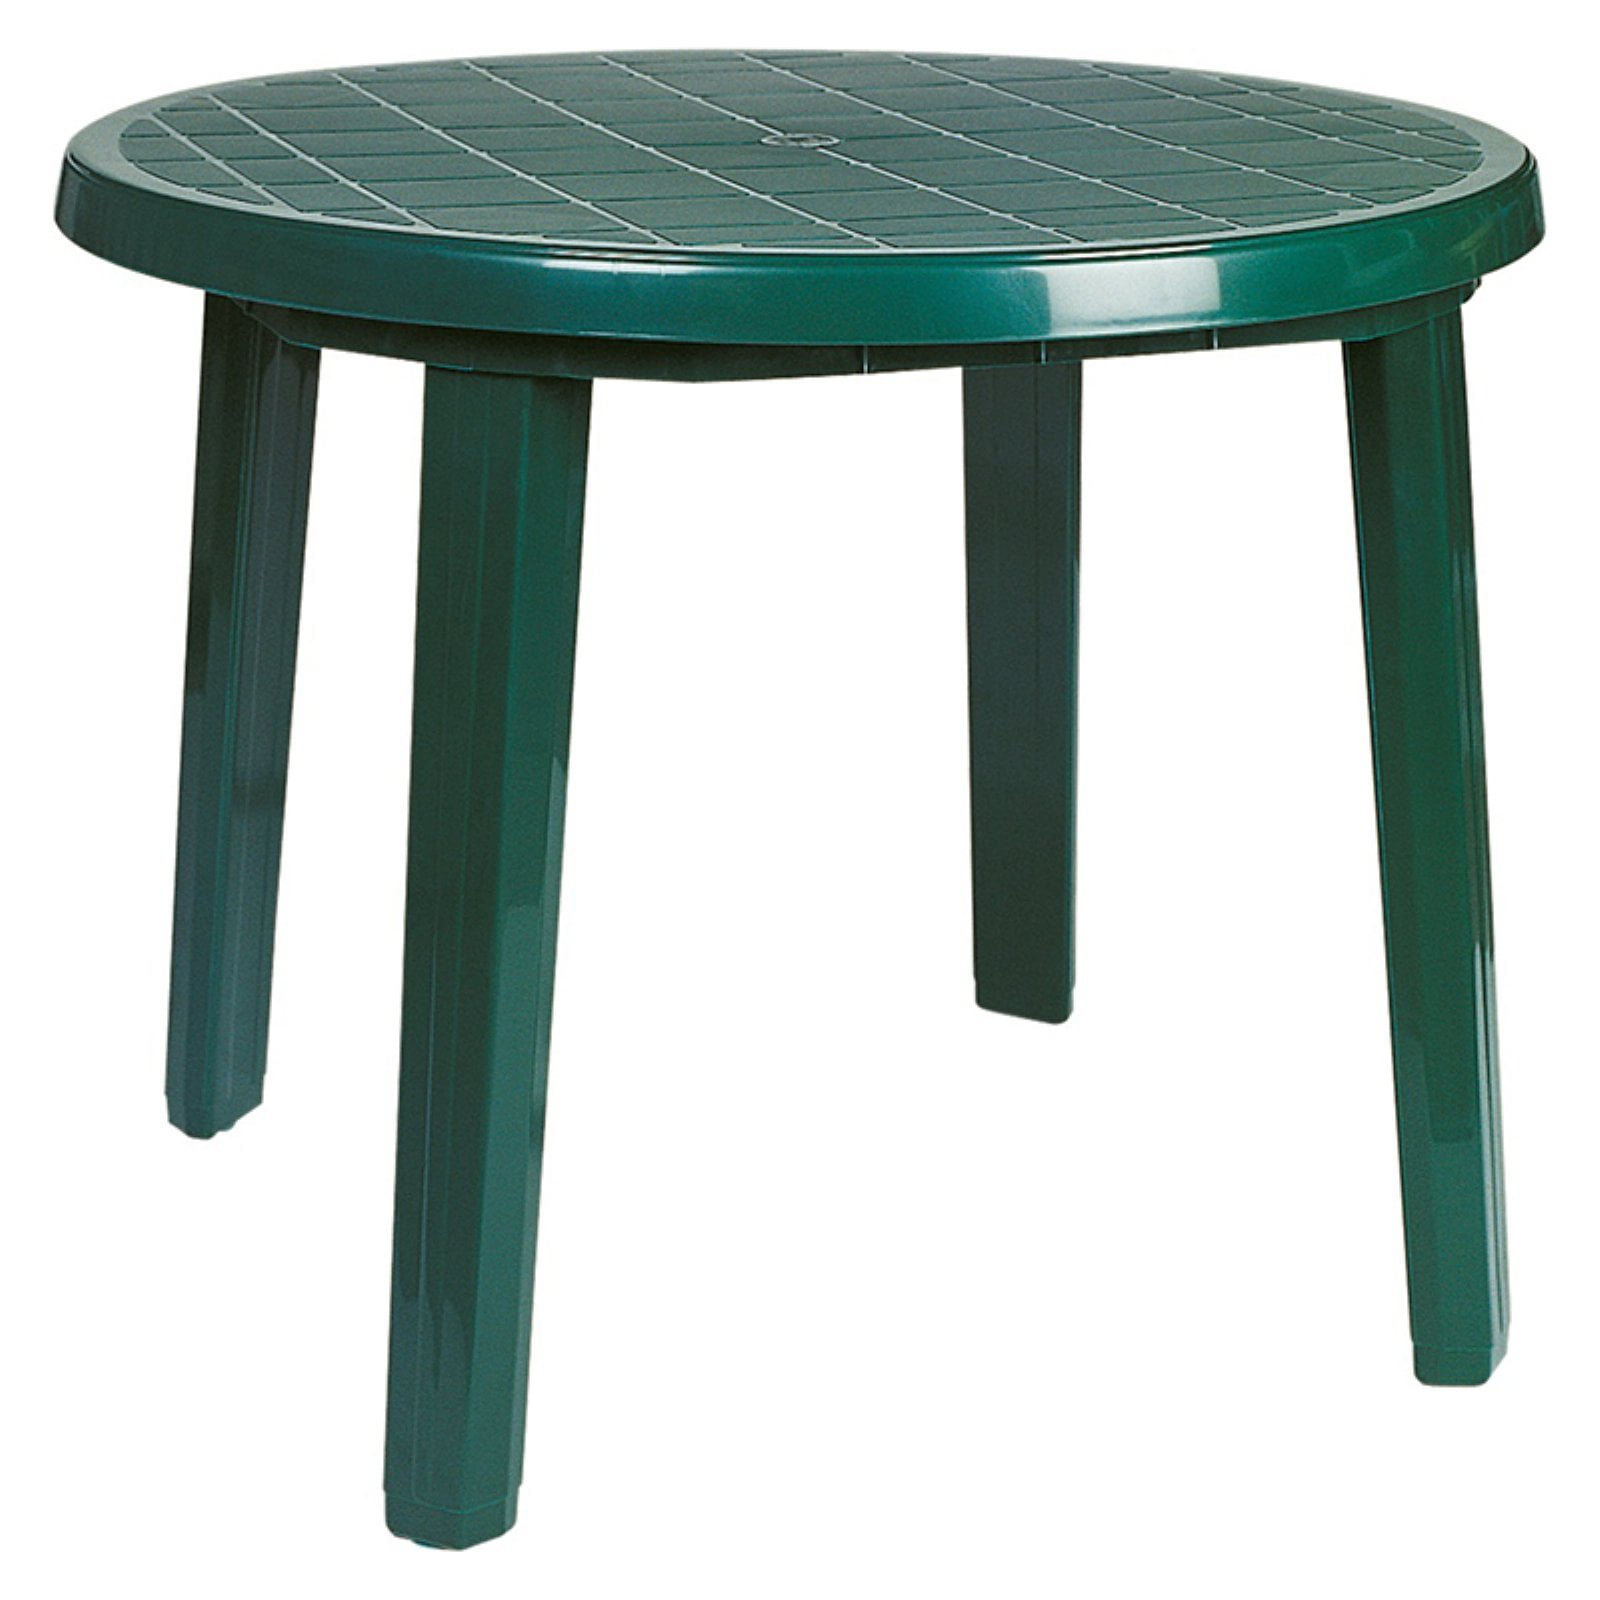 Isp125-gre 35.5 In. Ronda Resin Round Dining Table, Green